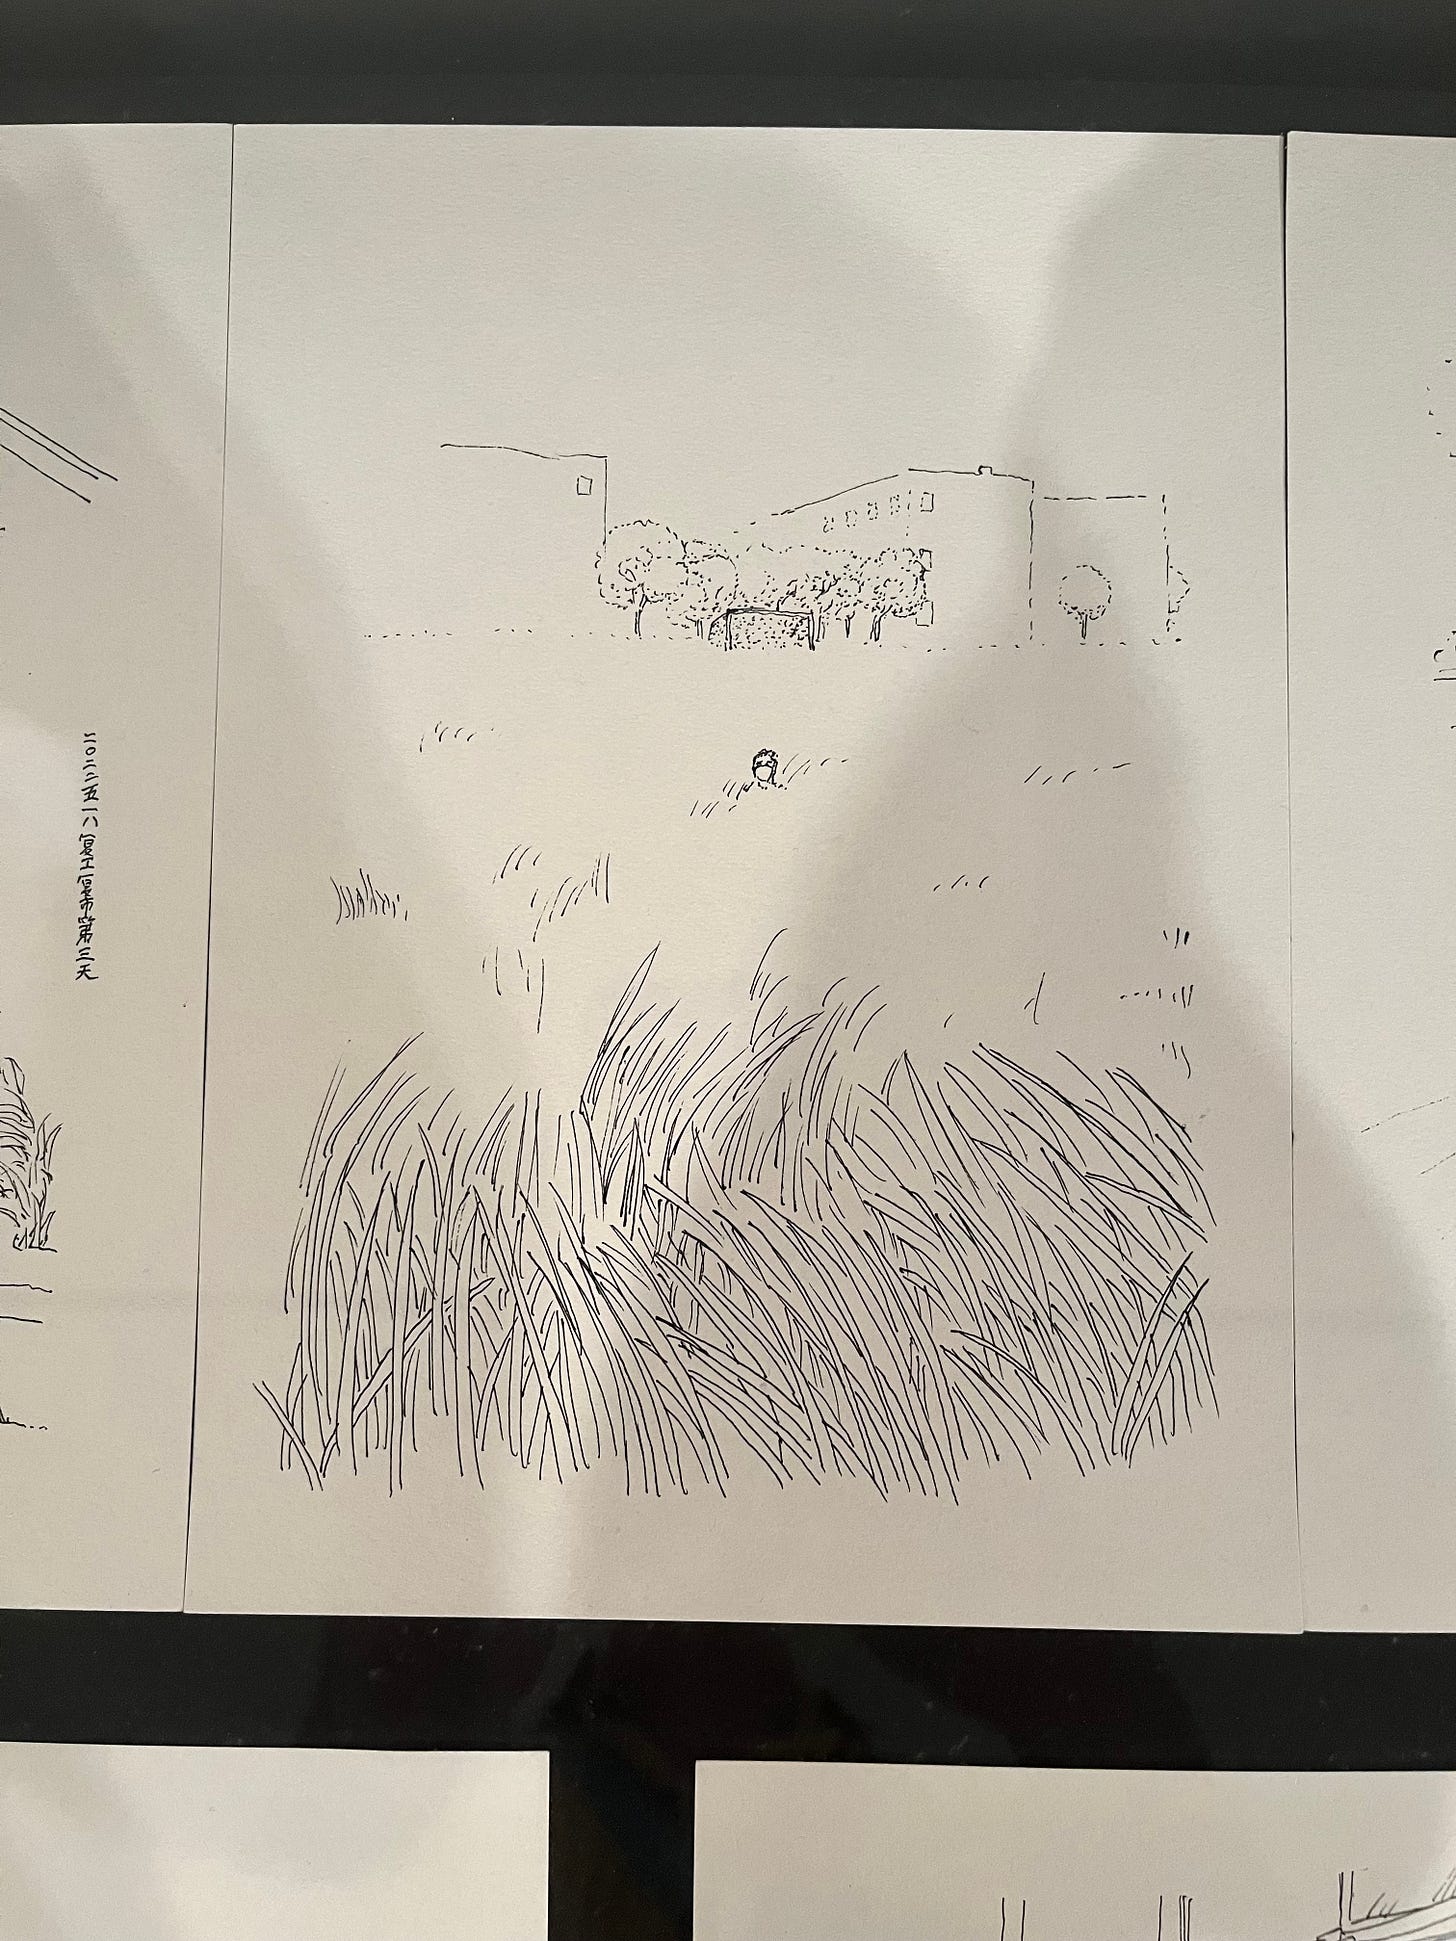 A photo of a line drawing featuring some detailed grass in the foreground, a lot of empty space and a small figure in the middle of the page. There are some buildings in the background. The line work is sparse and minimal.